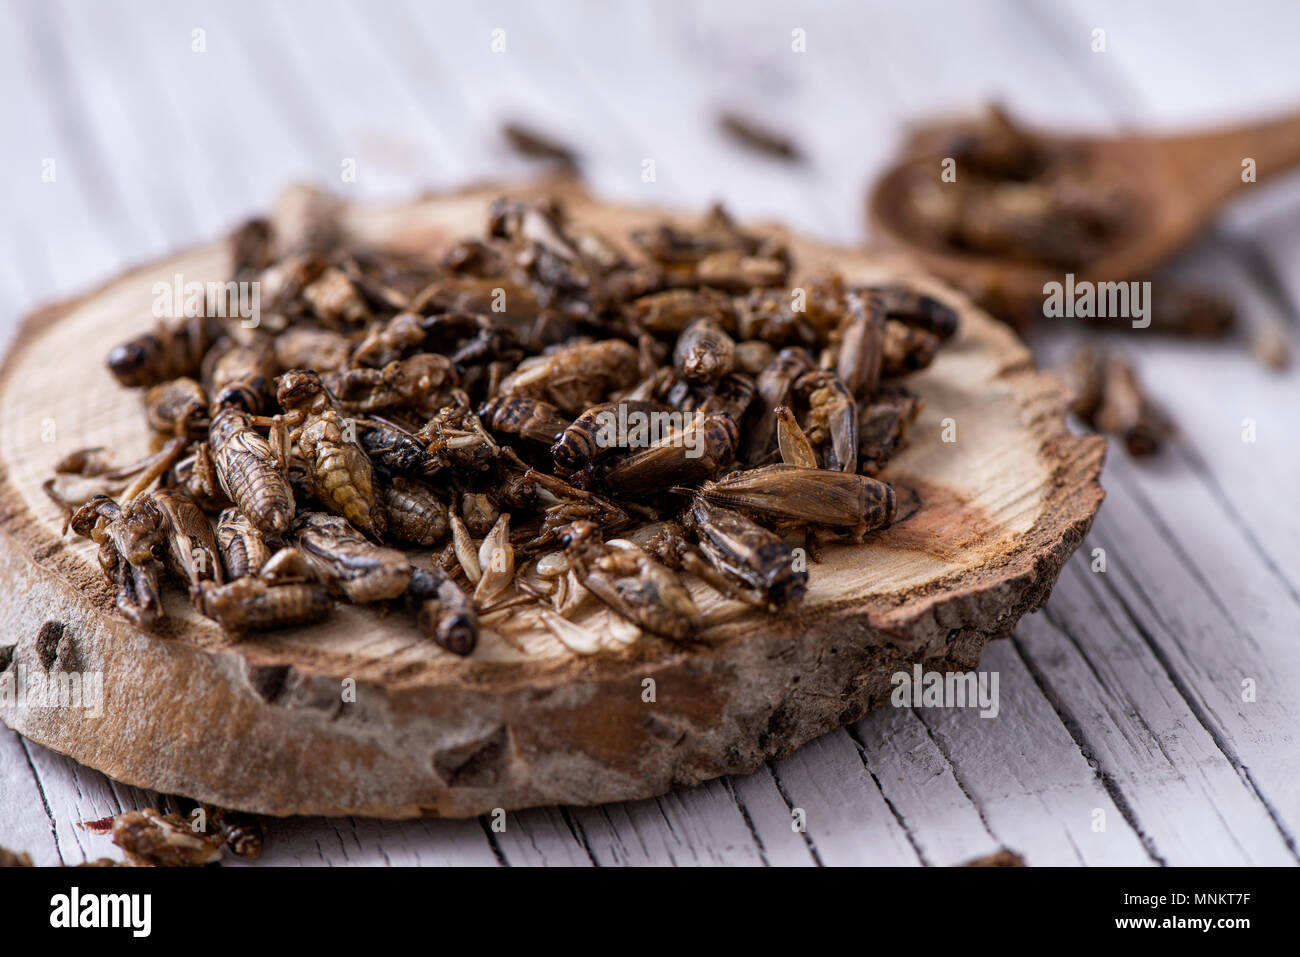 closeup of a pile of fried crickets seasoned with onion and barbecue sauce, in a wooden tray, on a rustic white wooden table Stock Photo